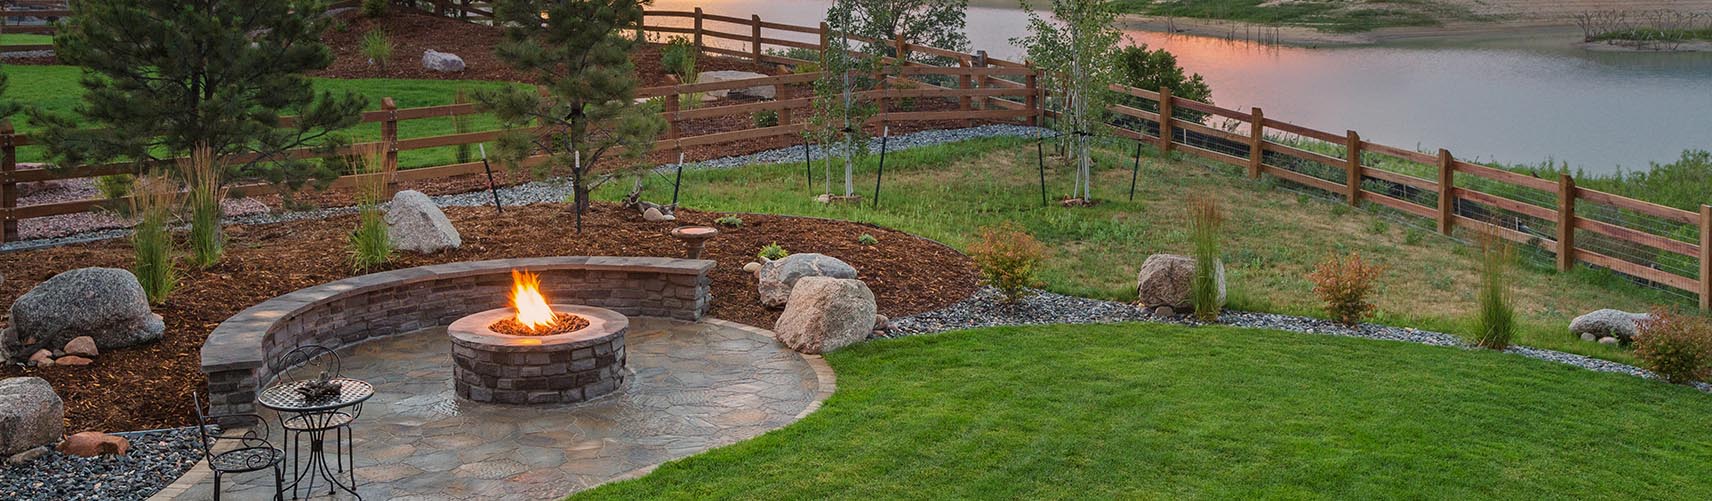 Fairfield Landscaping Services, Patio Builder and Lawn Care Services